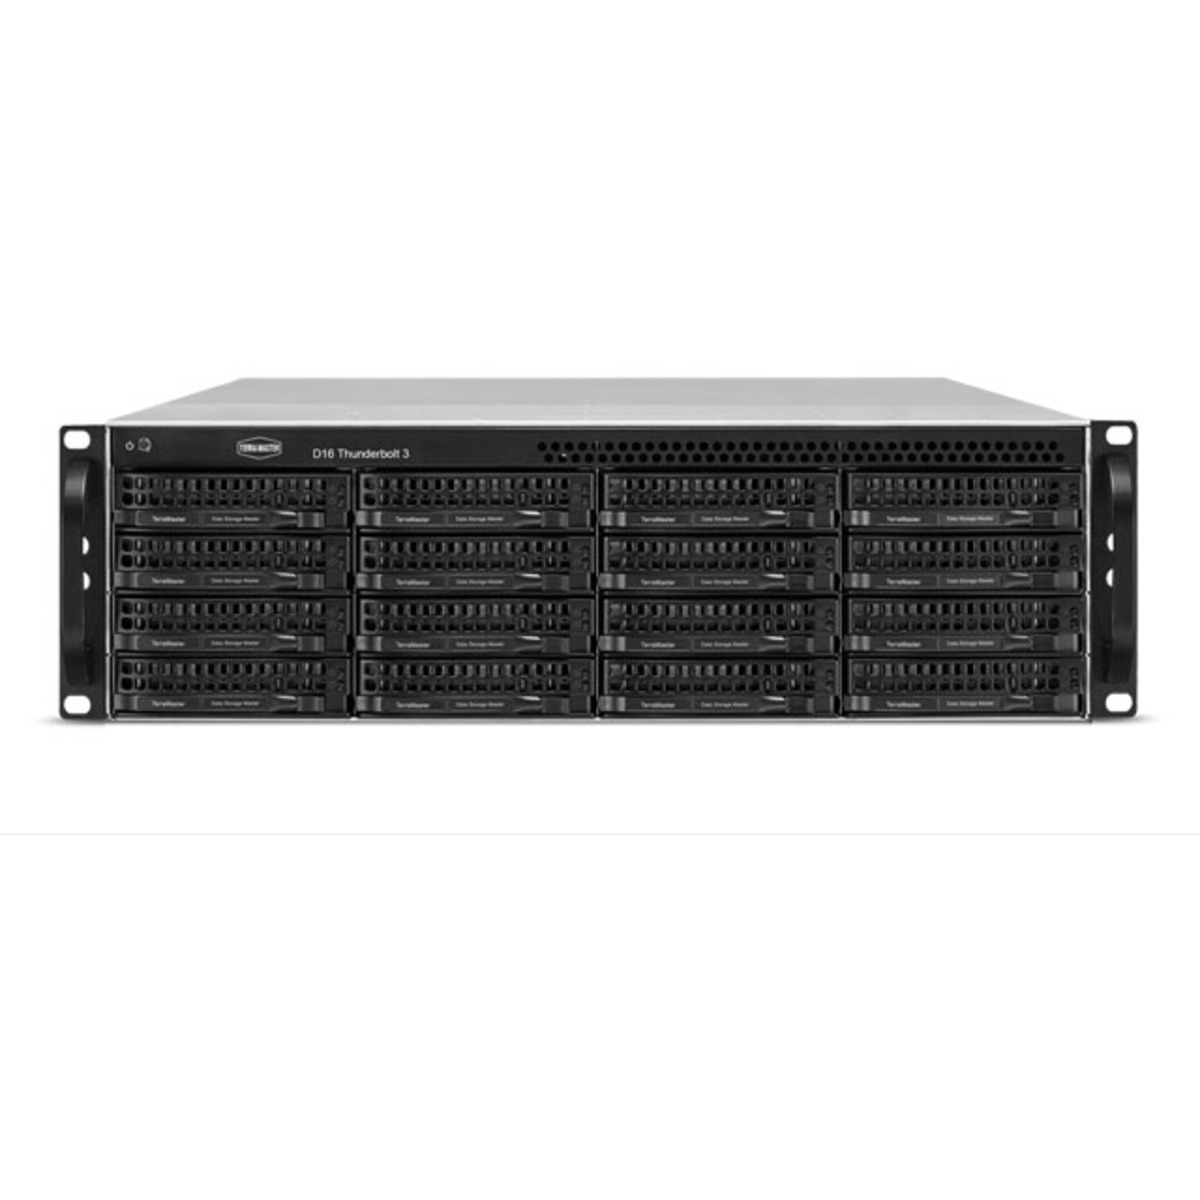 TerraMaster D16 Thunderbolt 3 8tb 16-Bay RackMount Multimedia / Power User / Business DAS - Direct Attached Storage Device 16x500gb Crucial MX500 CT500MX500SSD1 2.5 560/510MB/s SATA 6Gb/s SSD CONSUMER Class Drives Installed - Burn-In Tested D16 Thunderbolt 3